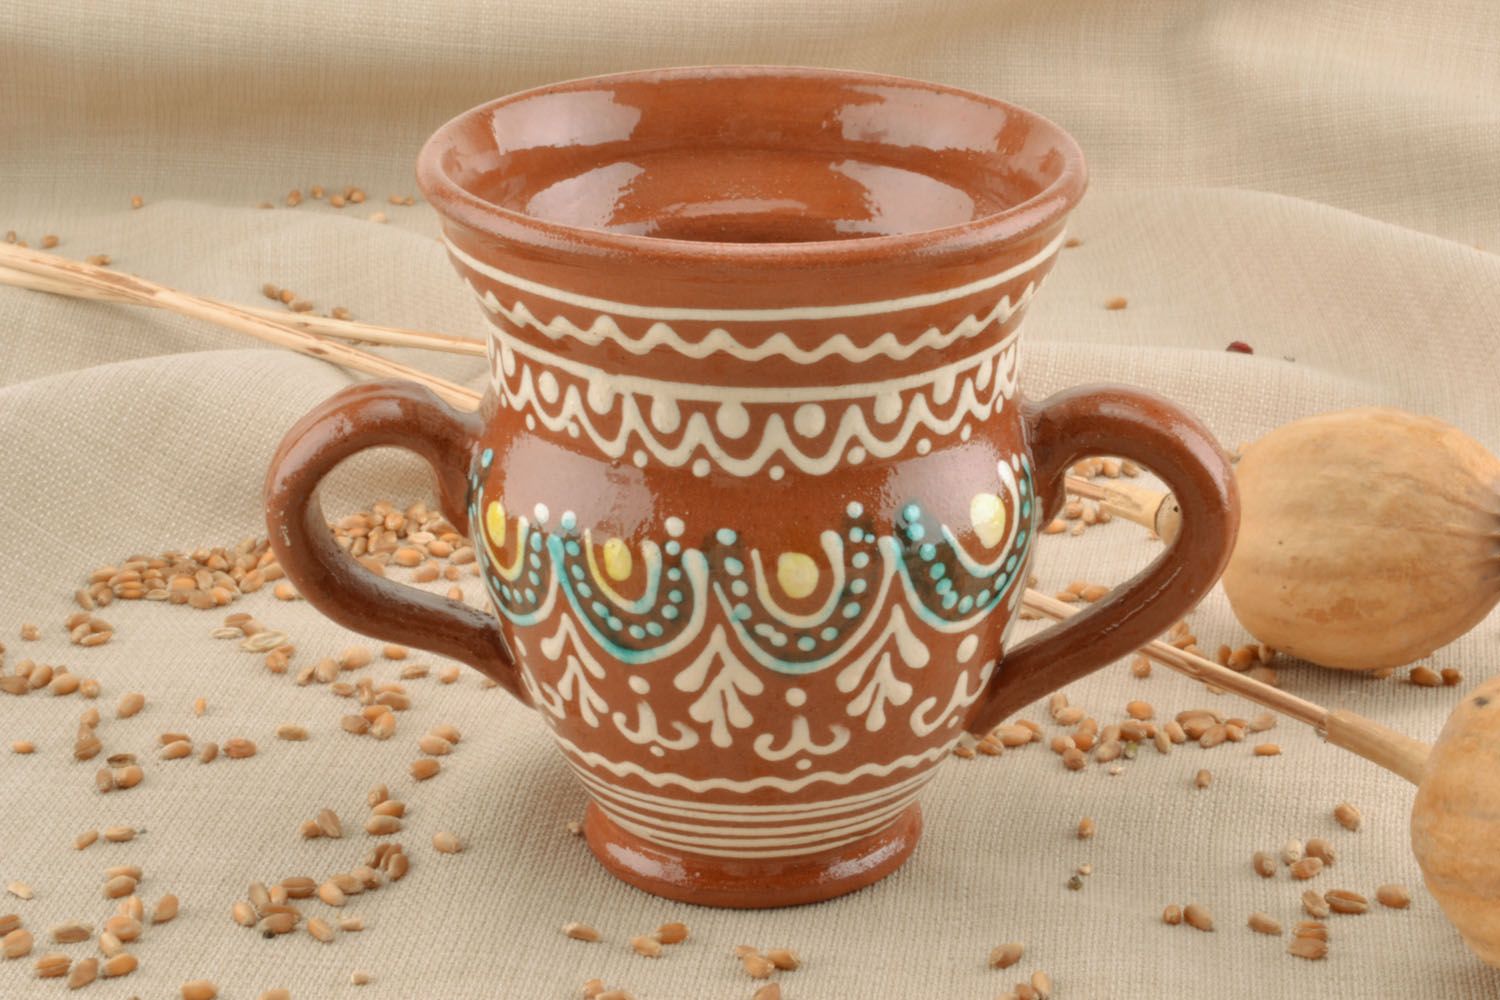 12 oz ceramic jug pot with two handle and paintings 0,76 lb photo 1